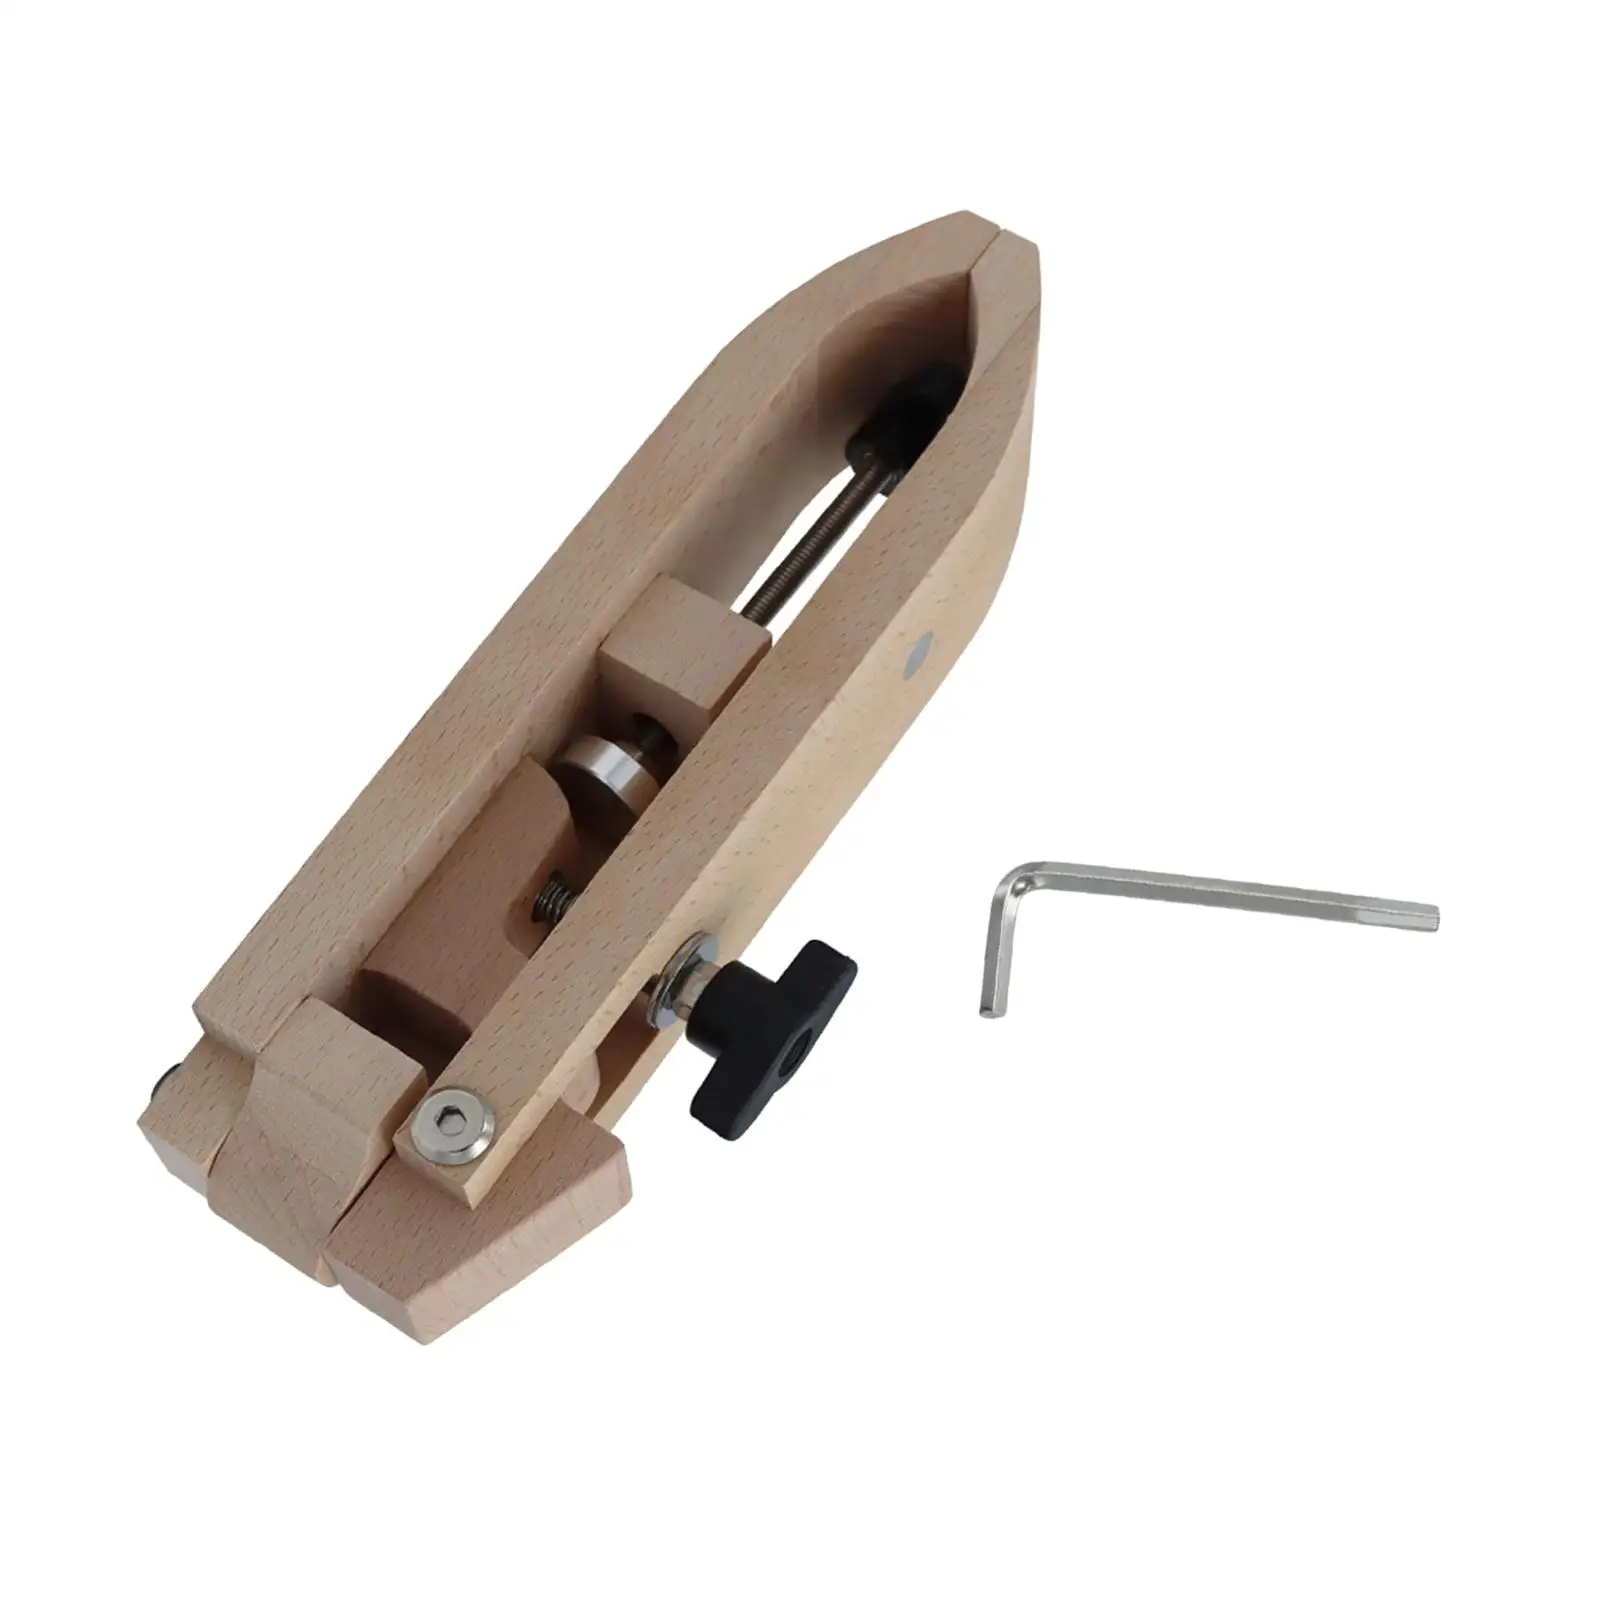 Wooden Leathercraft Clamp Sewing Leather Seam Vise DIY Tool Accessories Universal Leather Stitching Holder for DIY Leather